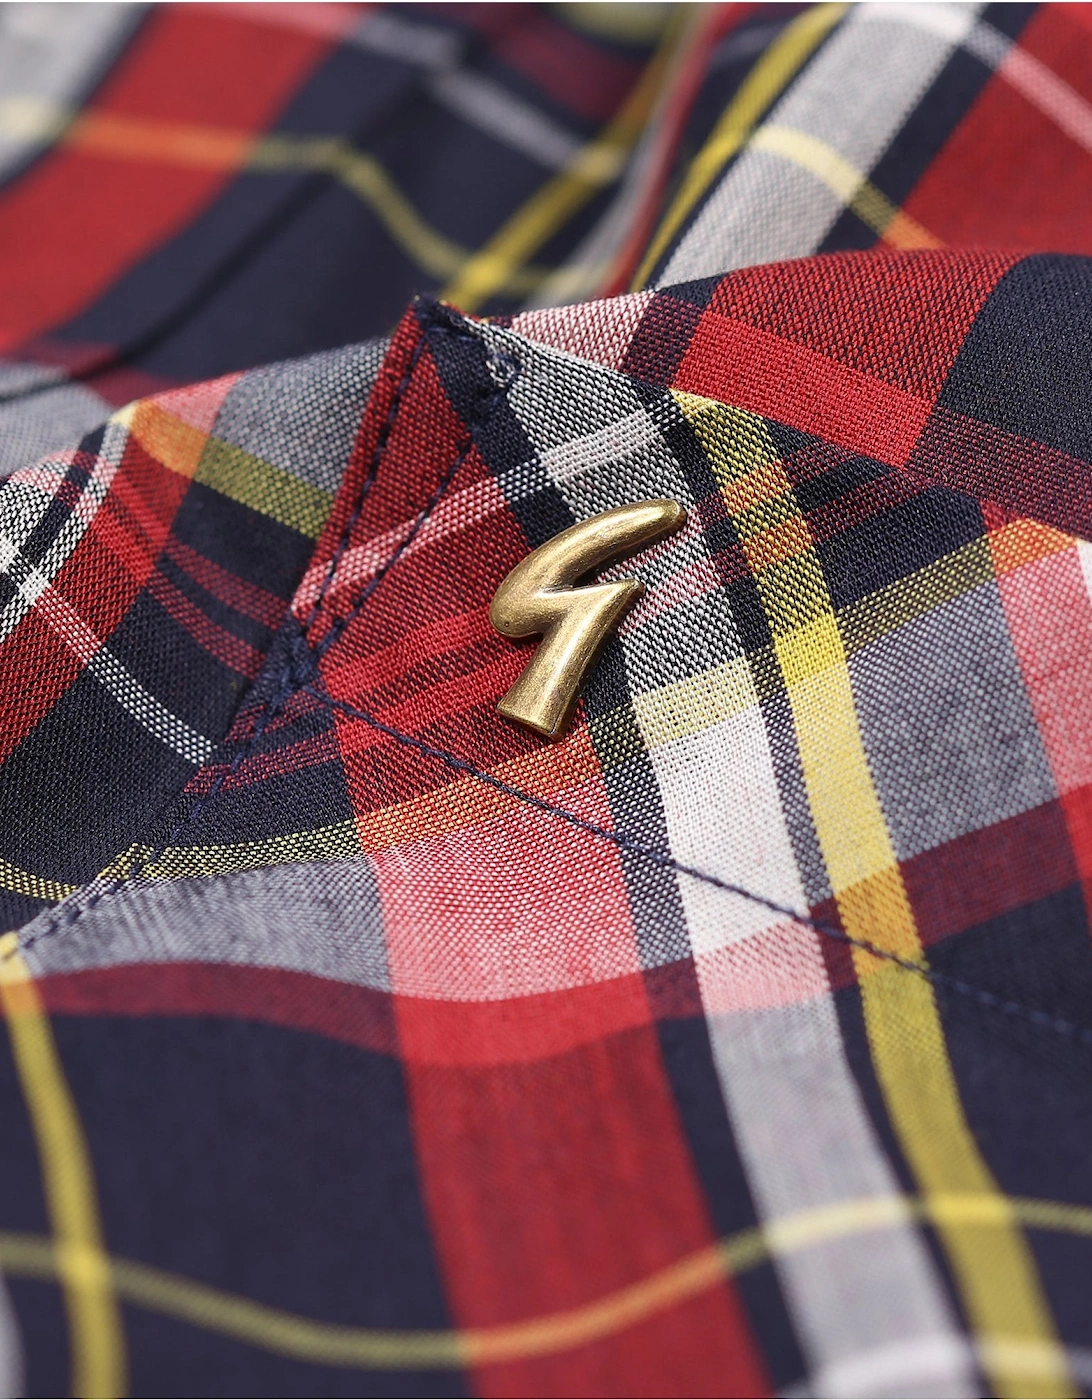 Caine Woven Check Shirt | Navy